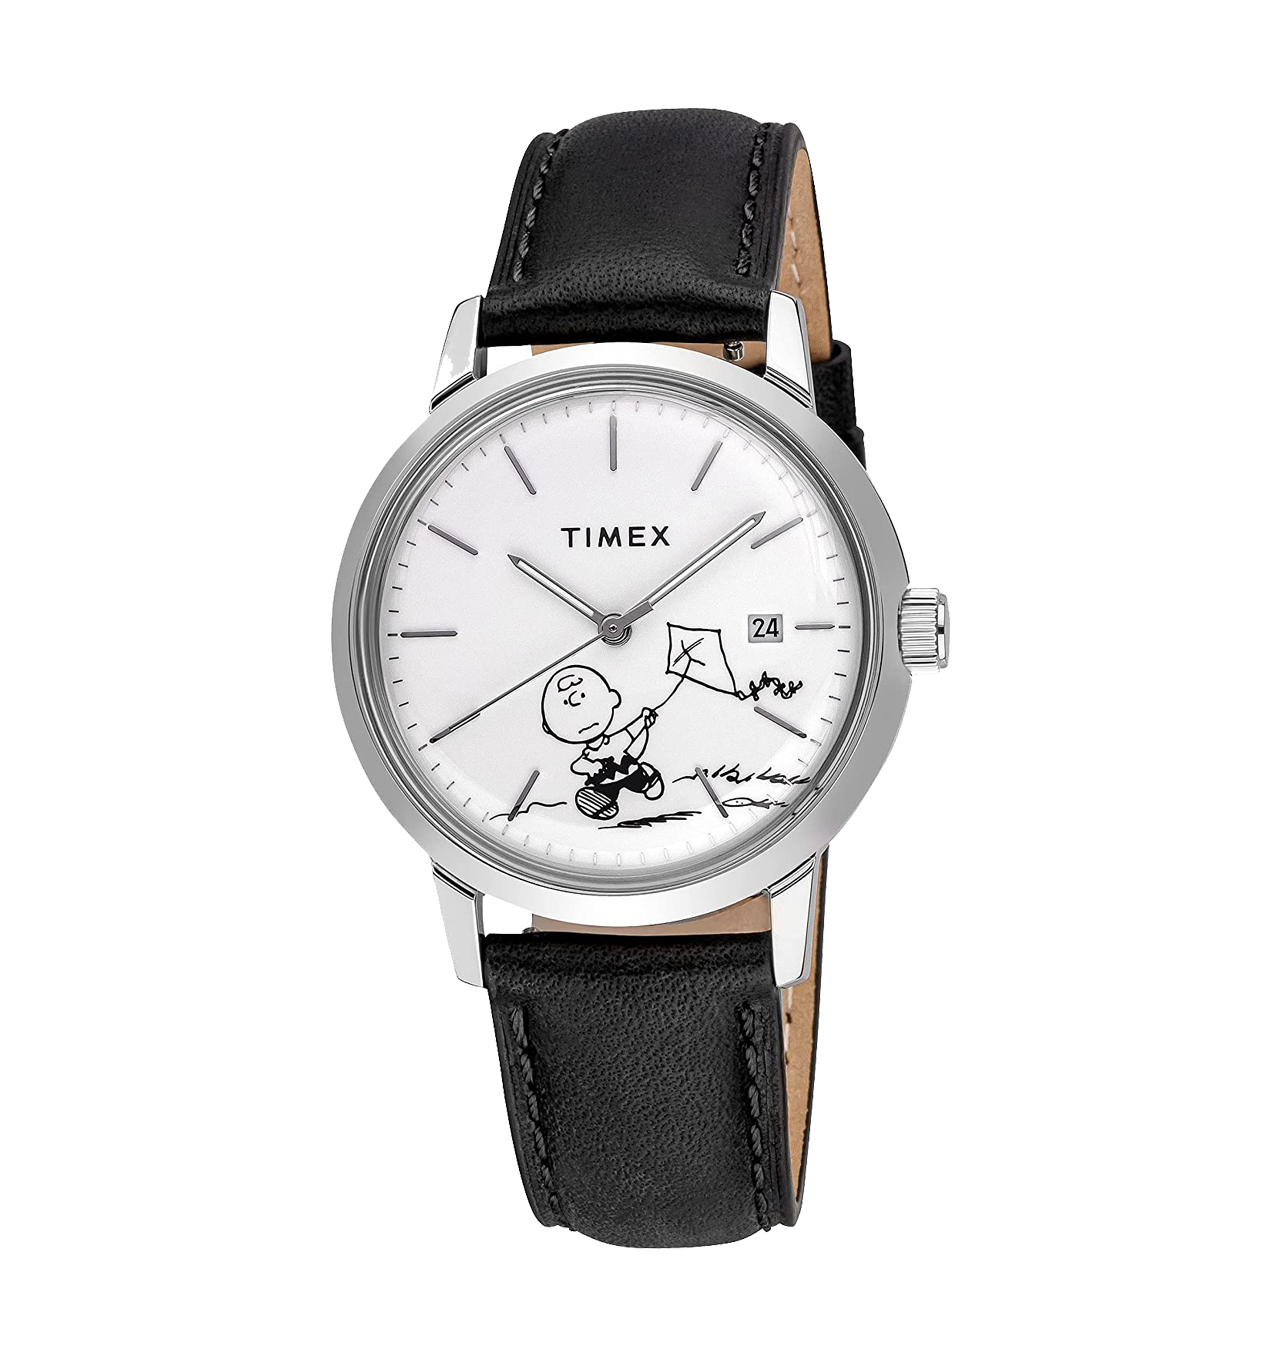 Timex---Peanuts---Marlin-Automatic-Charlie-Brown-Analogue-Automatic-Watch---Black-Leather-Strap1